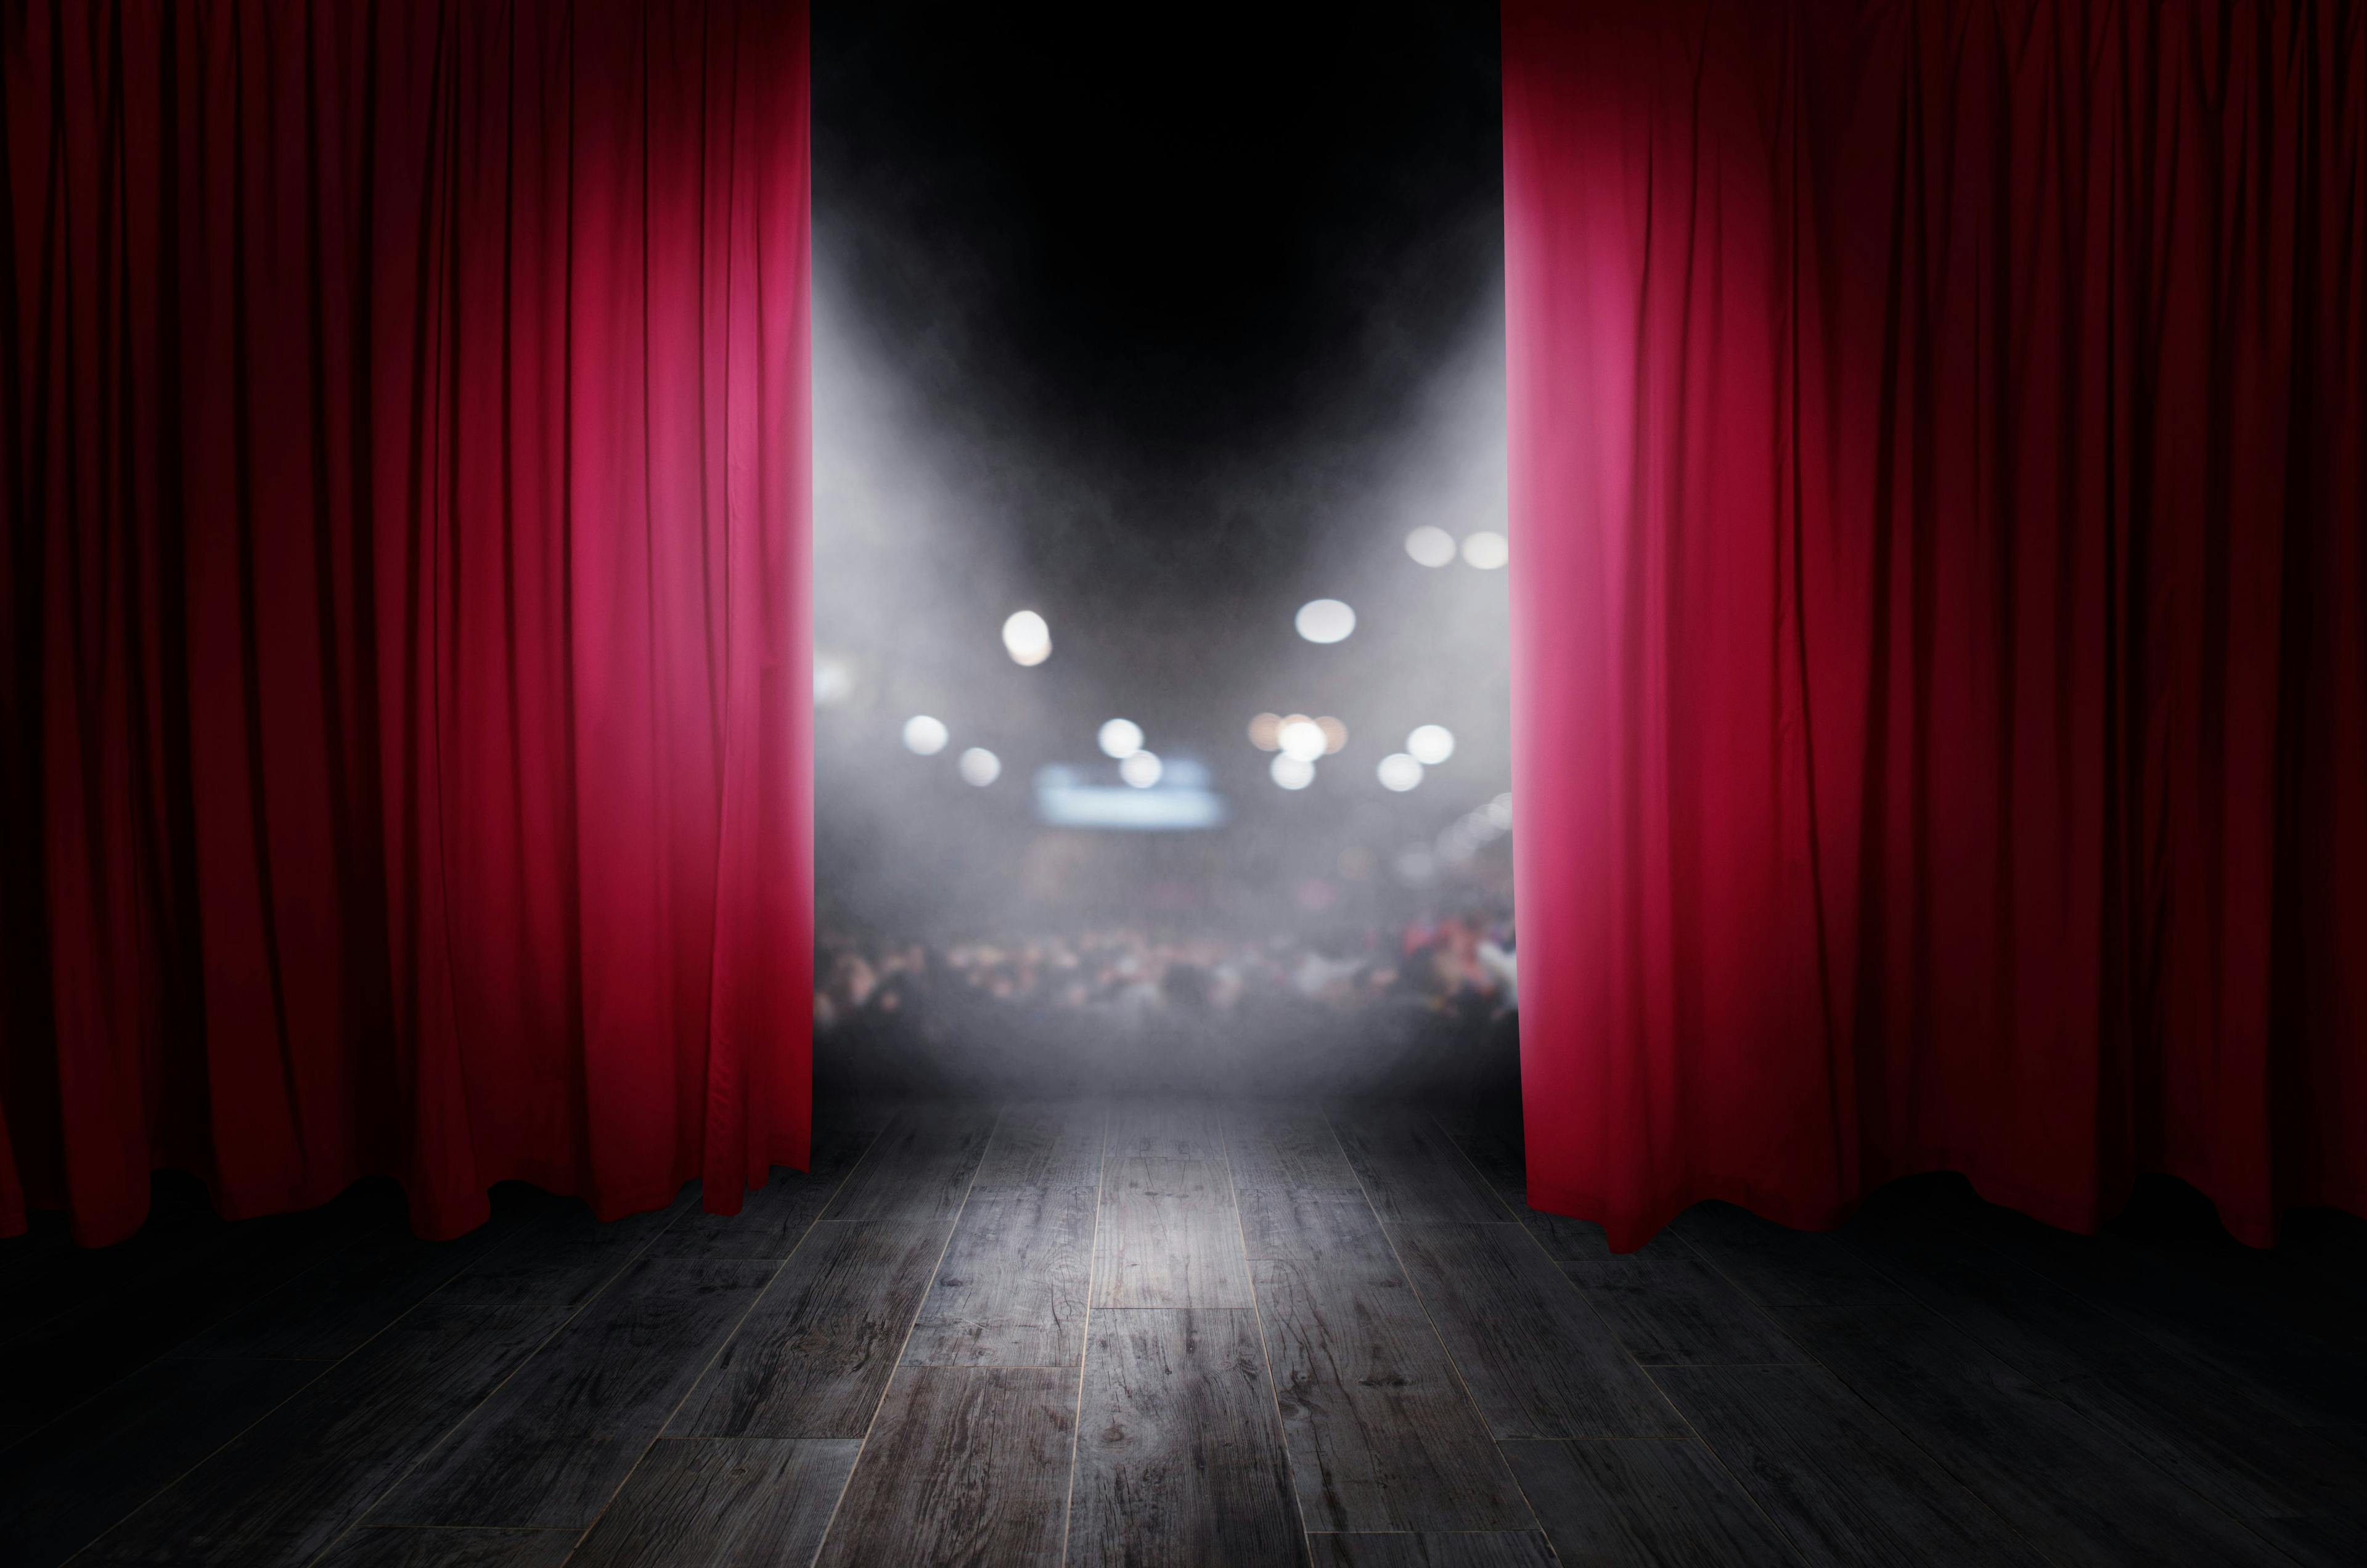 Image of a theatre stage with red curtains and a spotlight in the middle of the stage.